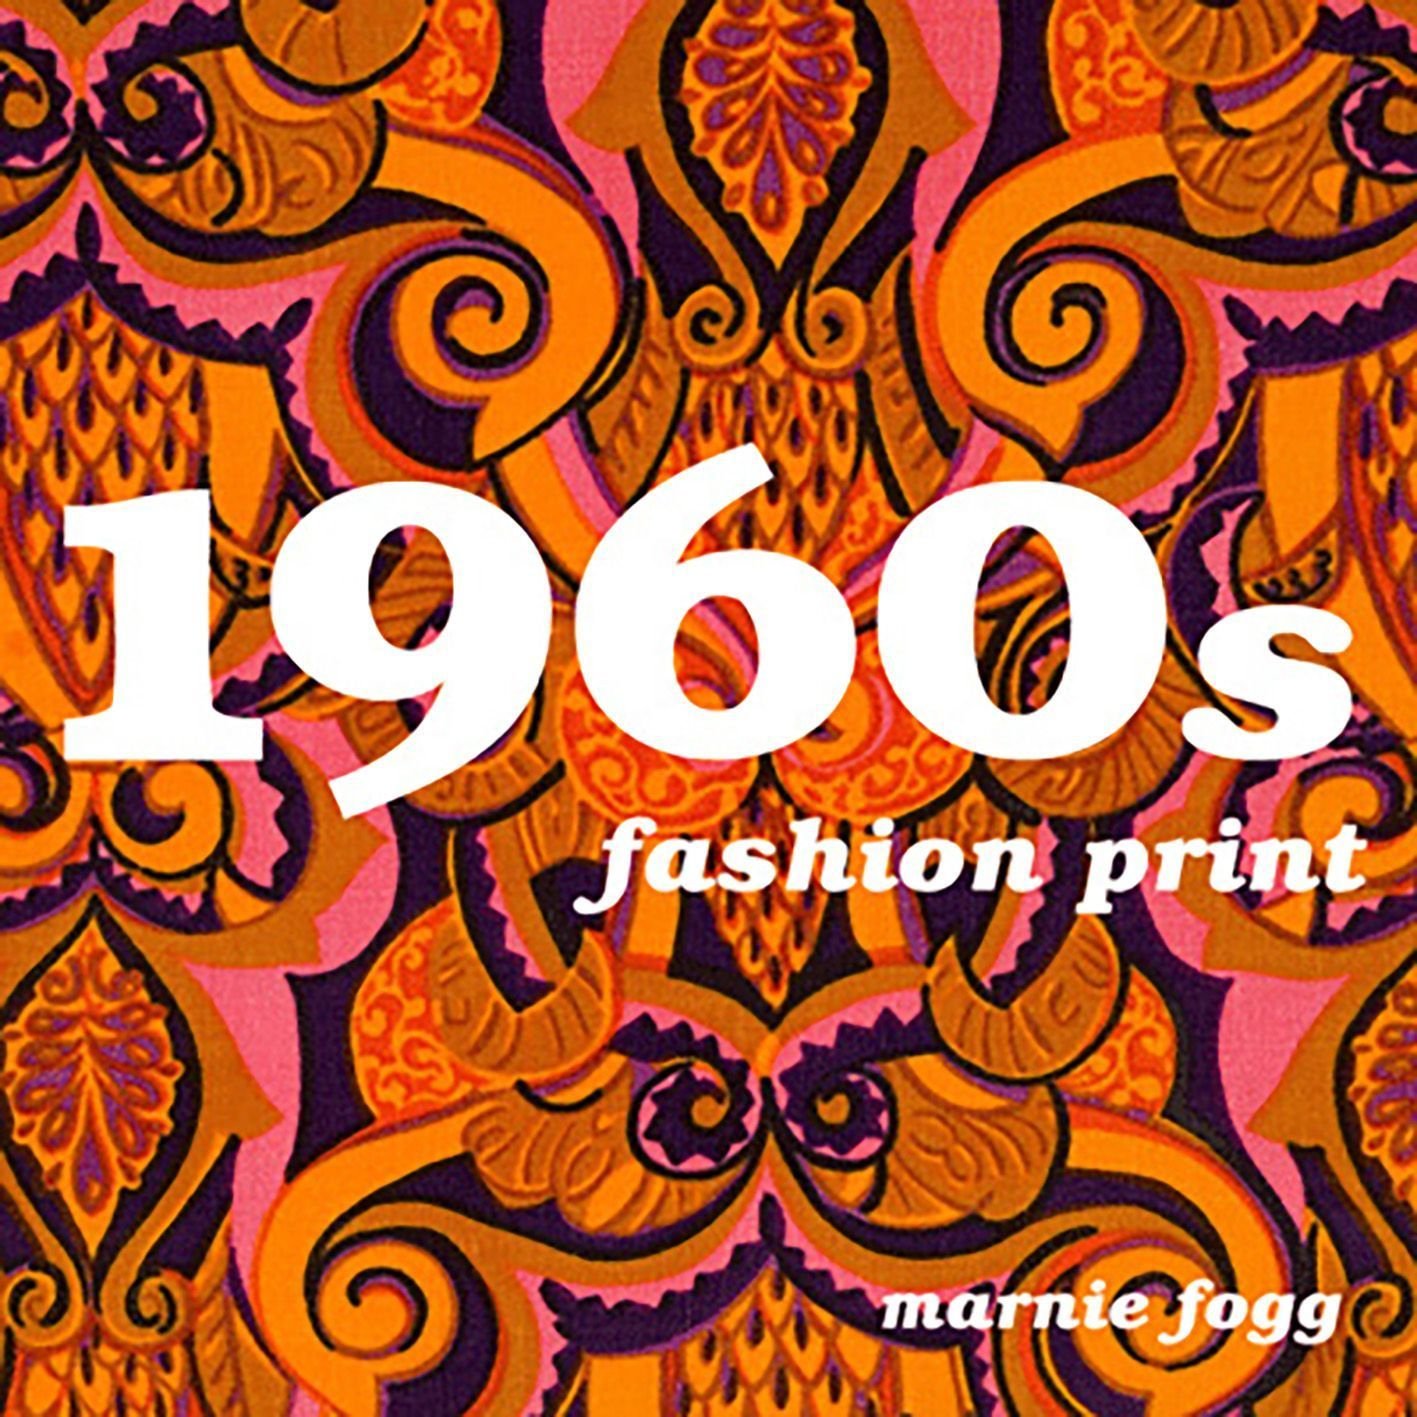 Buy 1960s Fashion Print by Marnie Fogg With Free Delivery